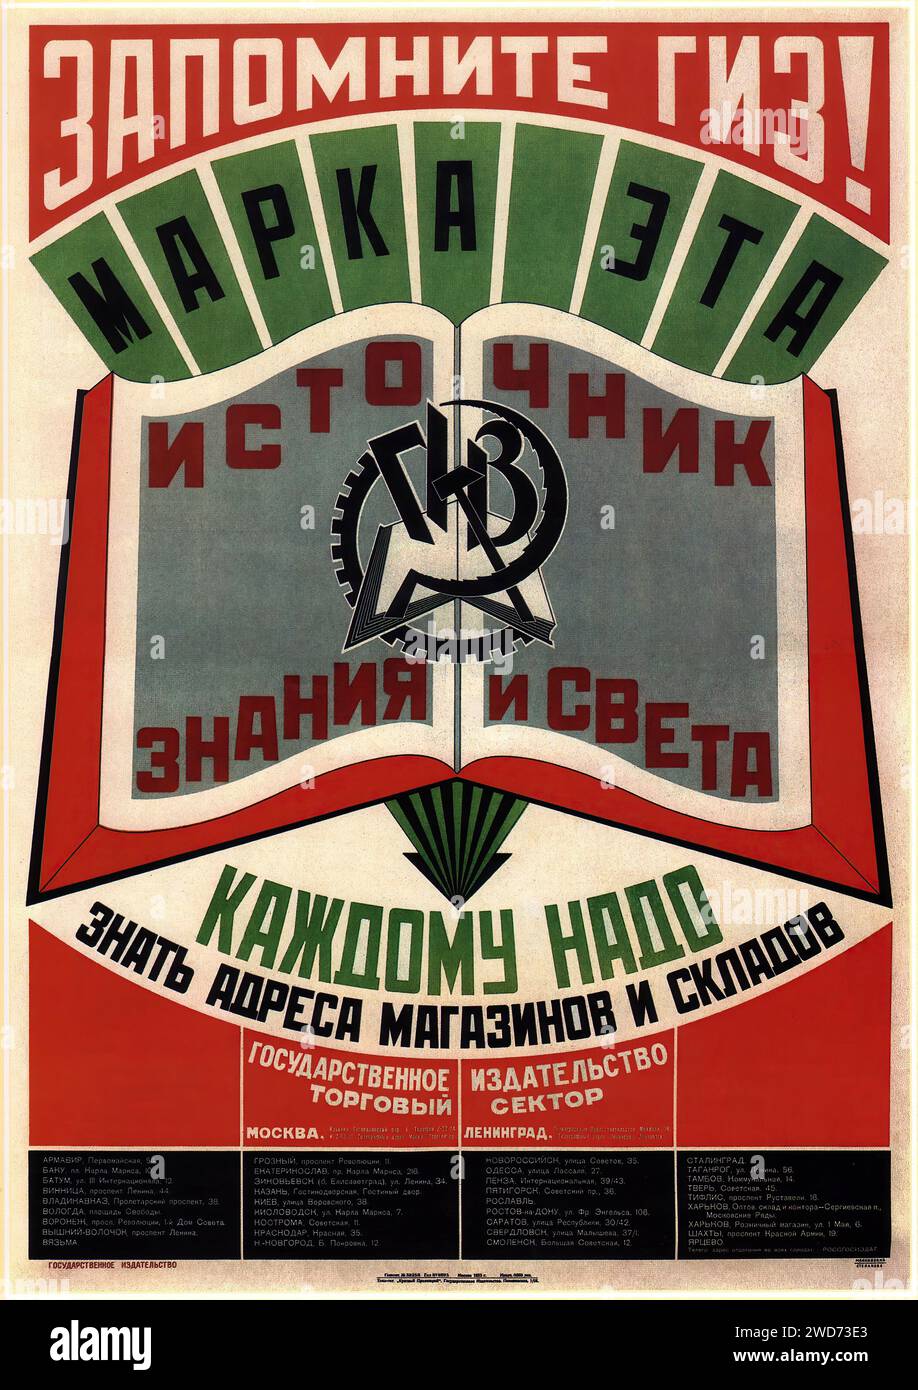 Vladimir Mayakovsky, Varvara Stepanova. GIZ State Publishers ad. 1925 - Vintage Soviet Advertising and propaganda - 'REMEMBER GIZ! A MARK OF KNOWLEDGE AND LIGHT! EVERYONE SHOULD KNOW THE ADDRESSES OF STORES AND WAREHOUSES State Publishing House' This poster includes a book with a gear symbolizing knowledge and industry, with a list of addresses for state stores and warehouses. The style is propagandistic with bold lettering and a stark color contrast, reminiscent of Soviet graphic design. Stock Photo